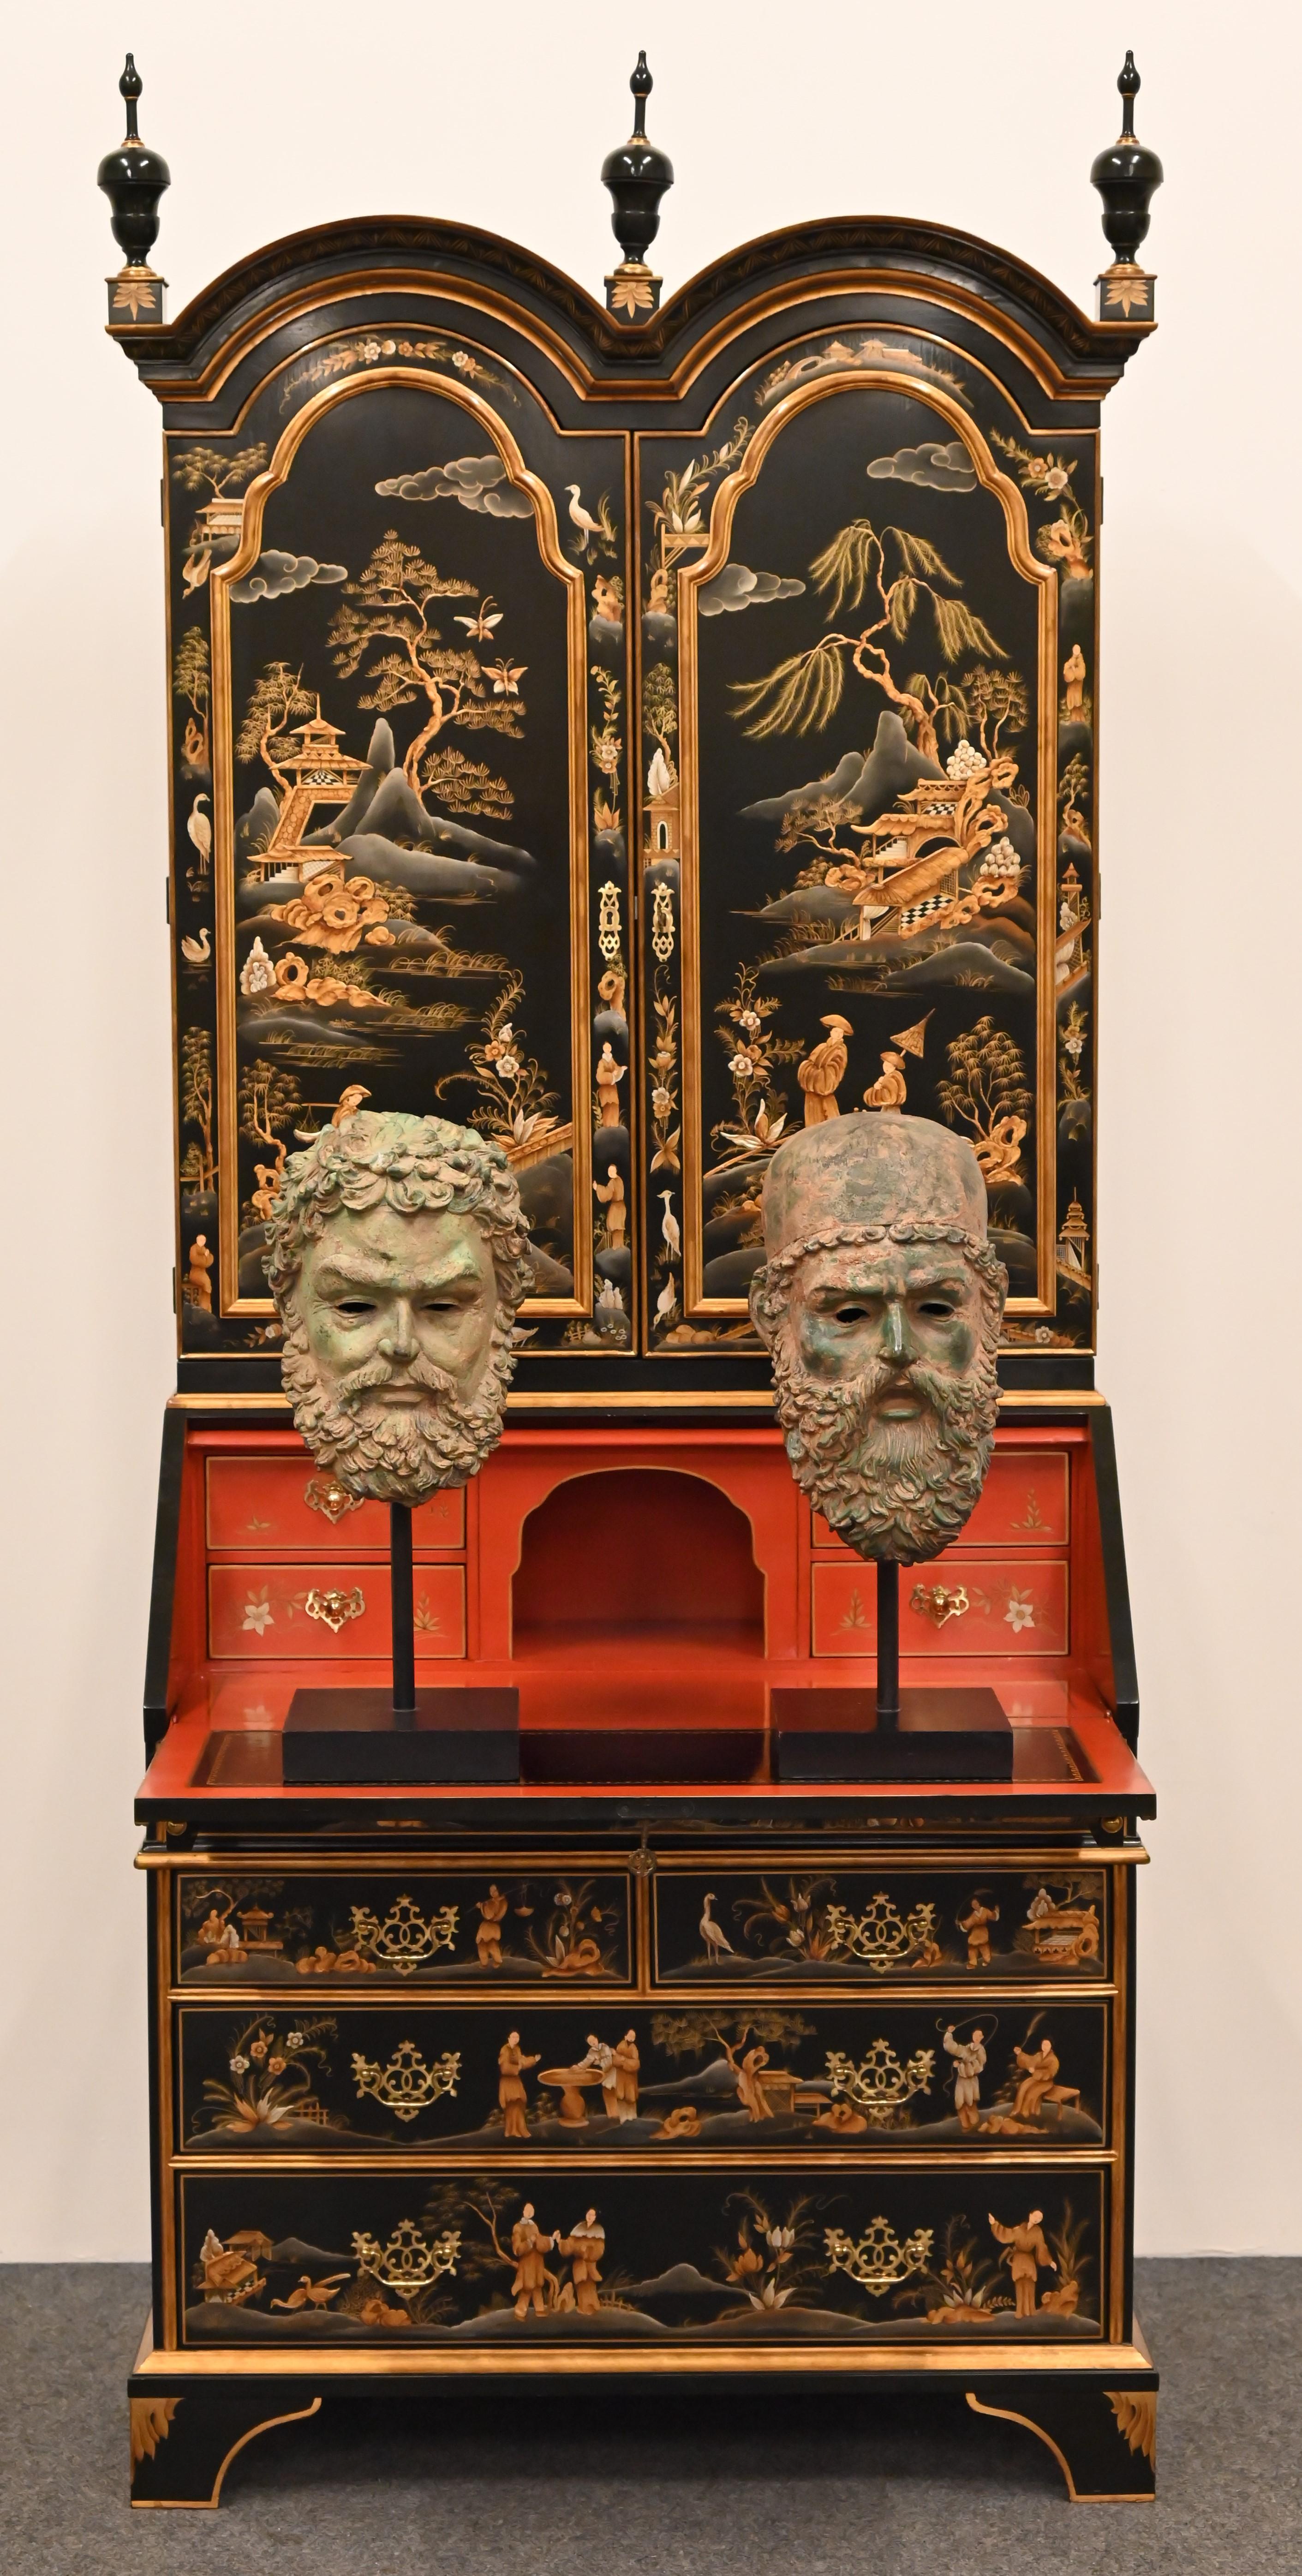 A handsome pair of what may appear to be Plato and Aristotle Busts, 1990s. The Greek philosophers of the Classical period of Ancient Greece. The statues are most likely decorative 1990s era but have a wonderful look and great scale. Would look great